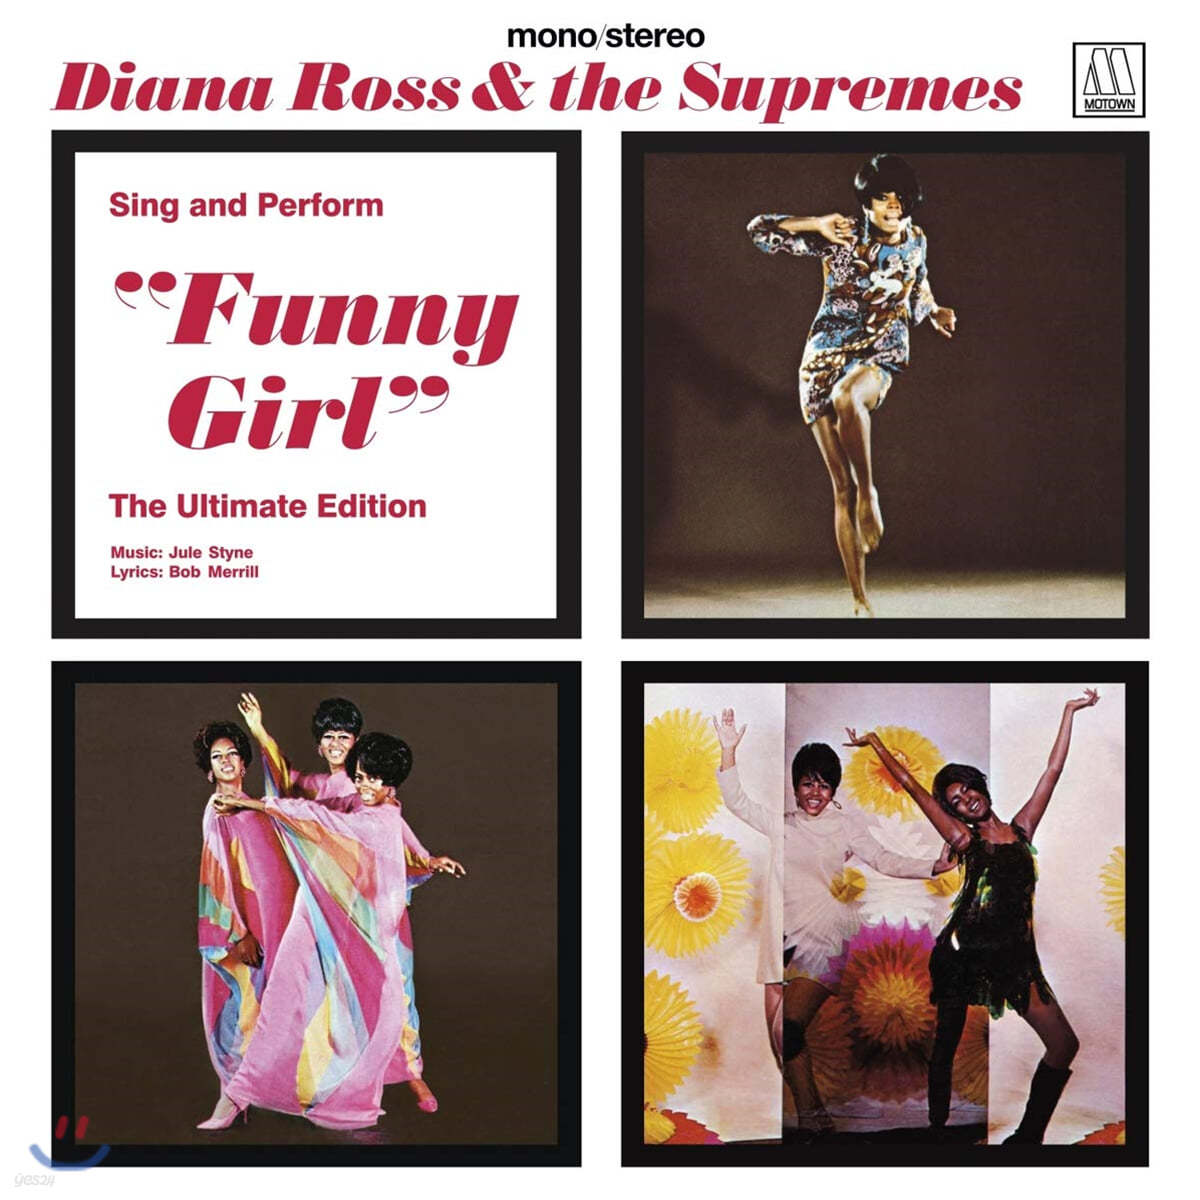 Diana Ross & The Supremes (다이아나 로스 앤 더 슈프림스) - Sing and Perform "Funny Girl" - The Ultimate Edition